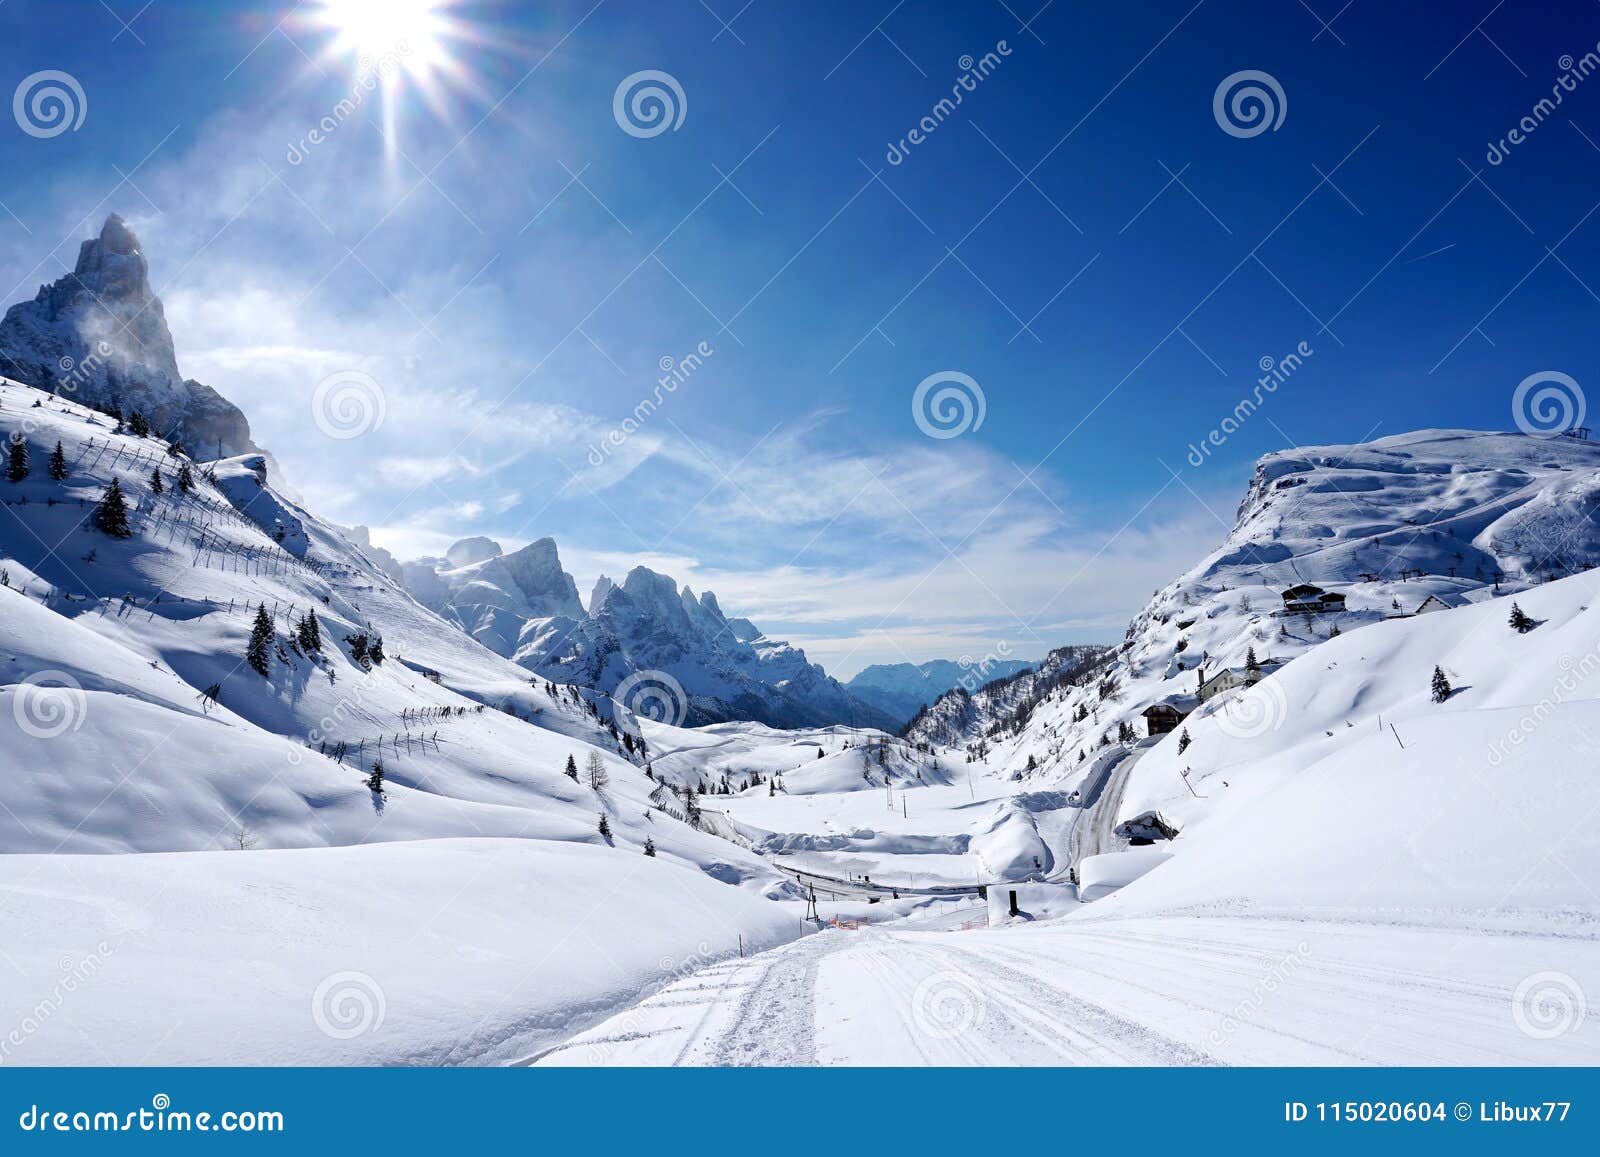 snow mountains landscape sunny day